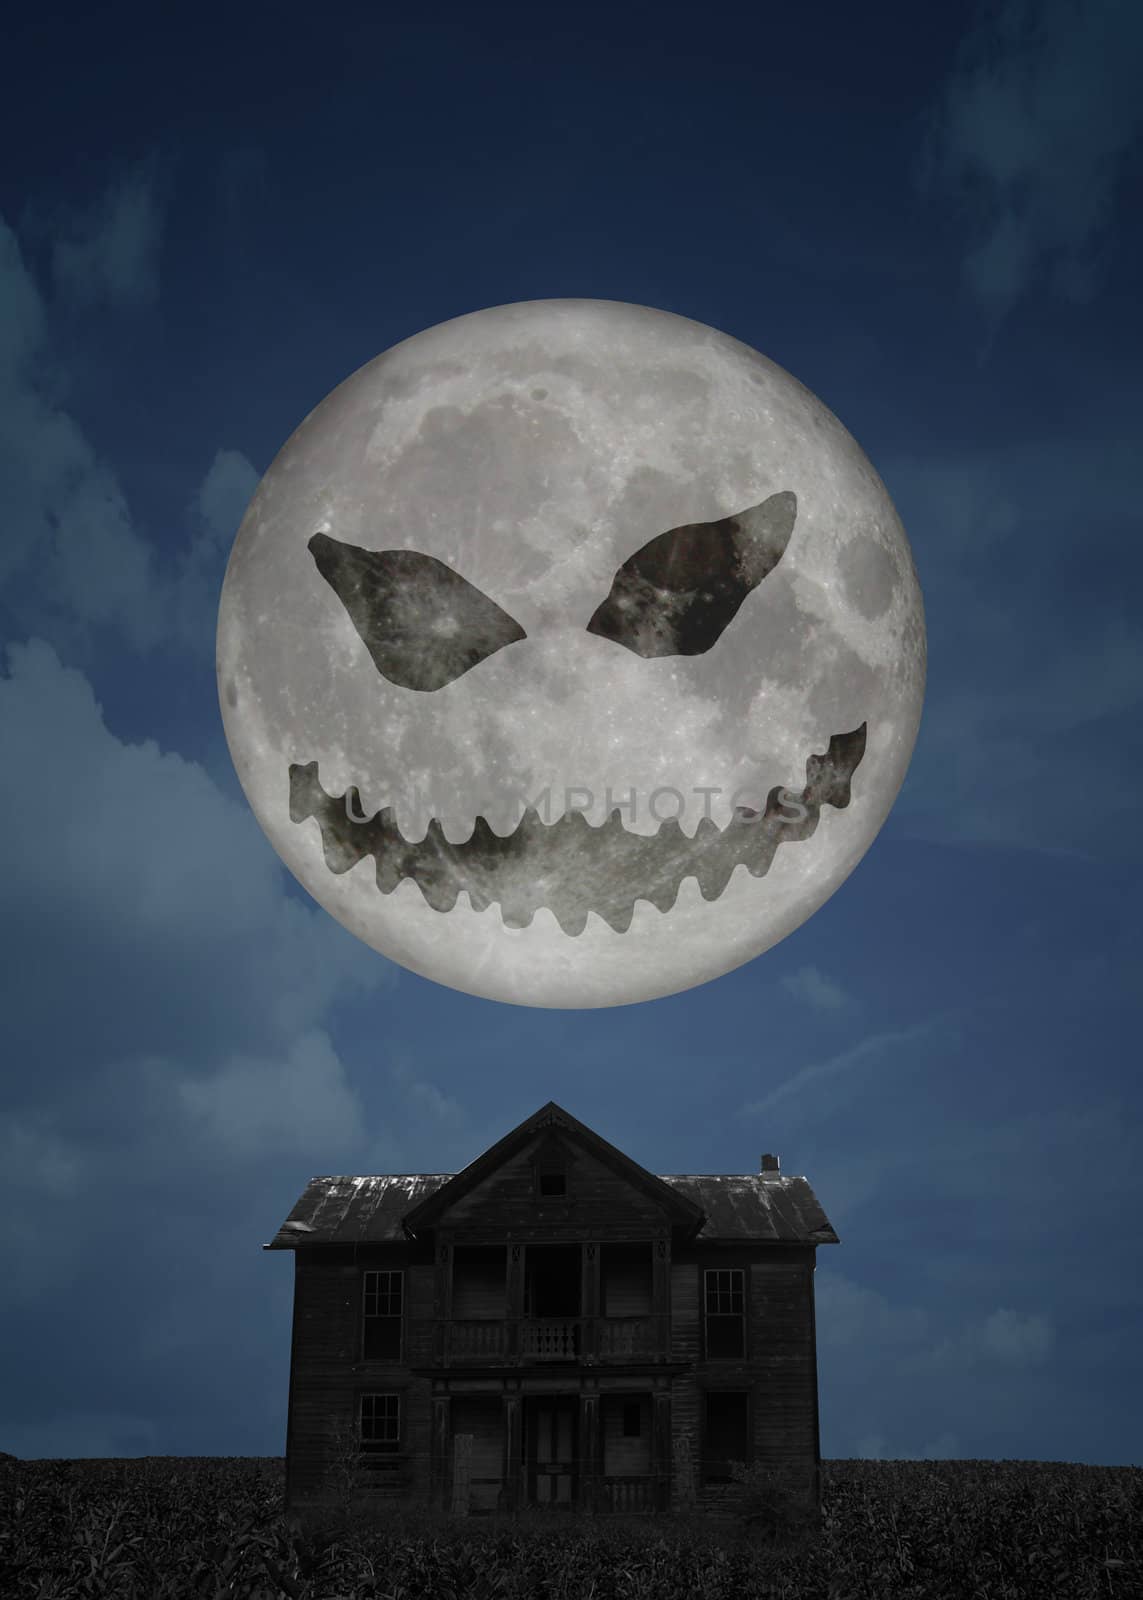 A scary Halloween illustration: Spooky landscape by night with the full moon having a jack-o-lantern face over a creepy dark old house.